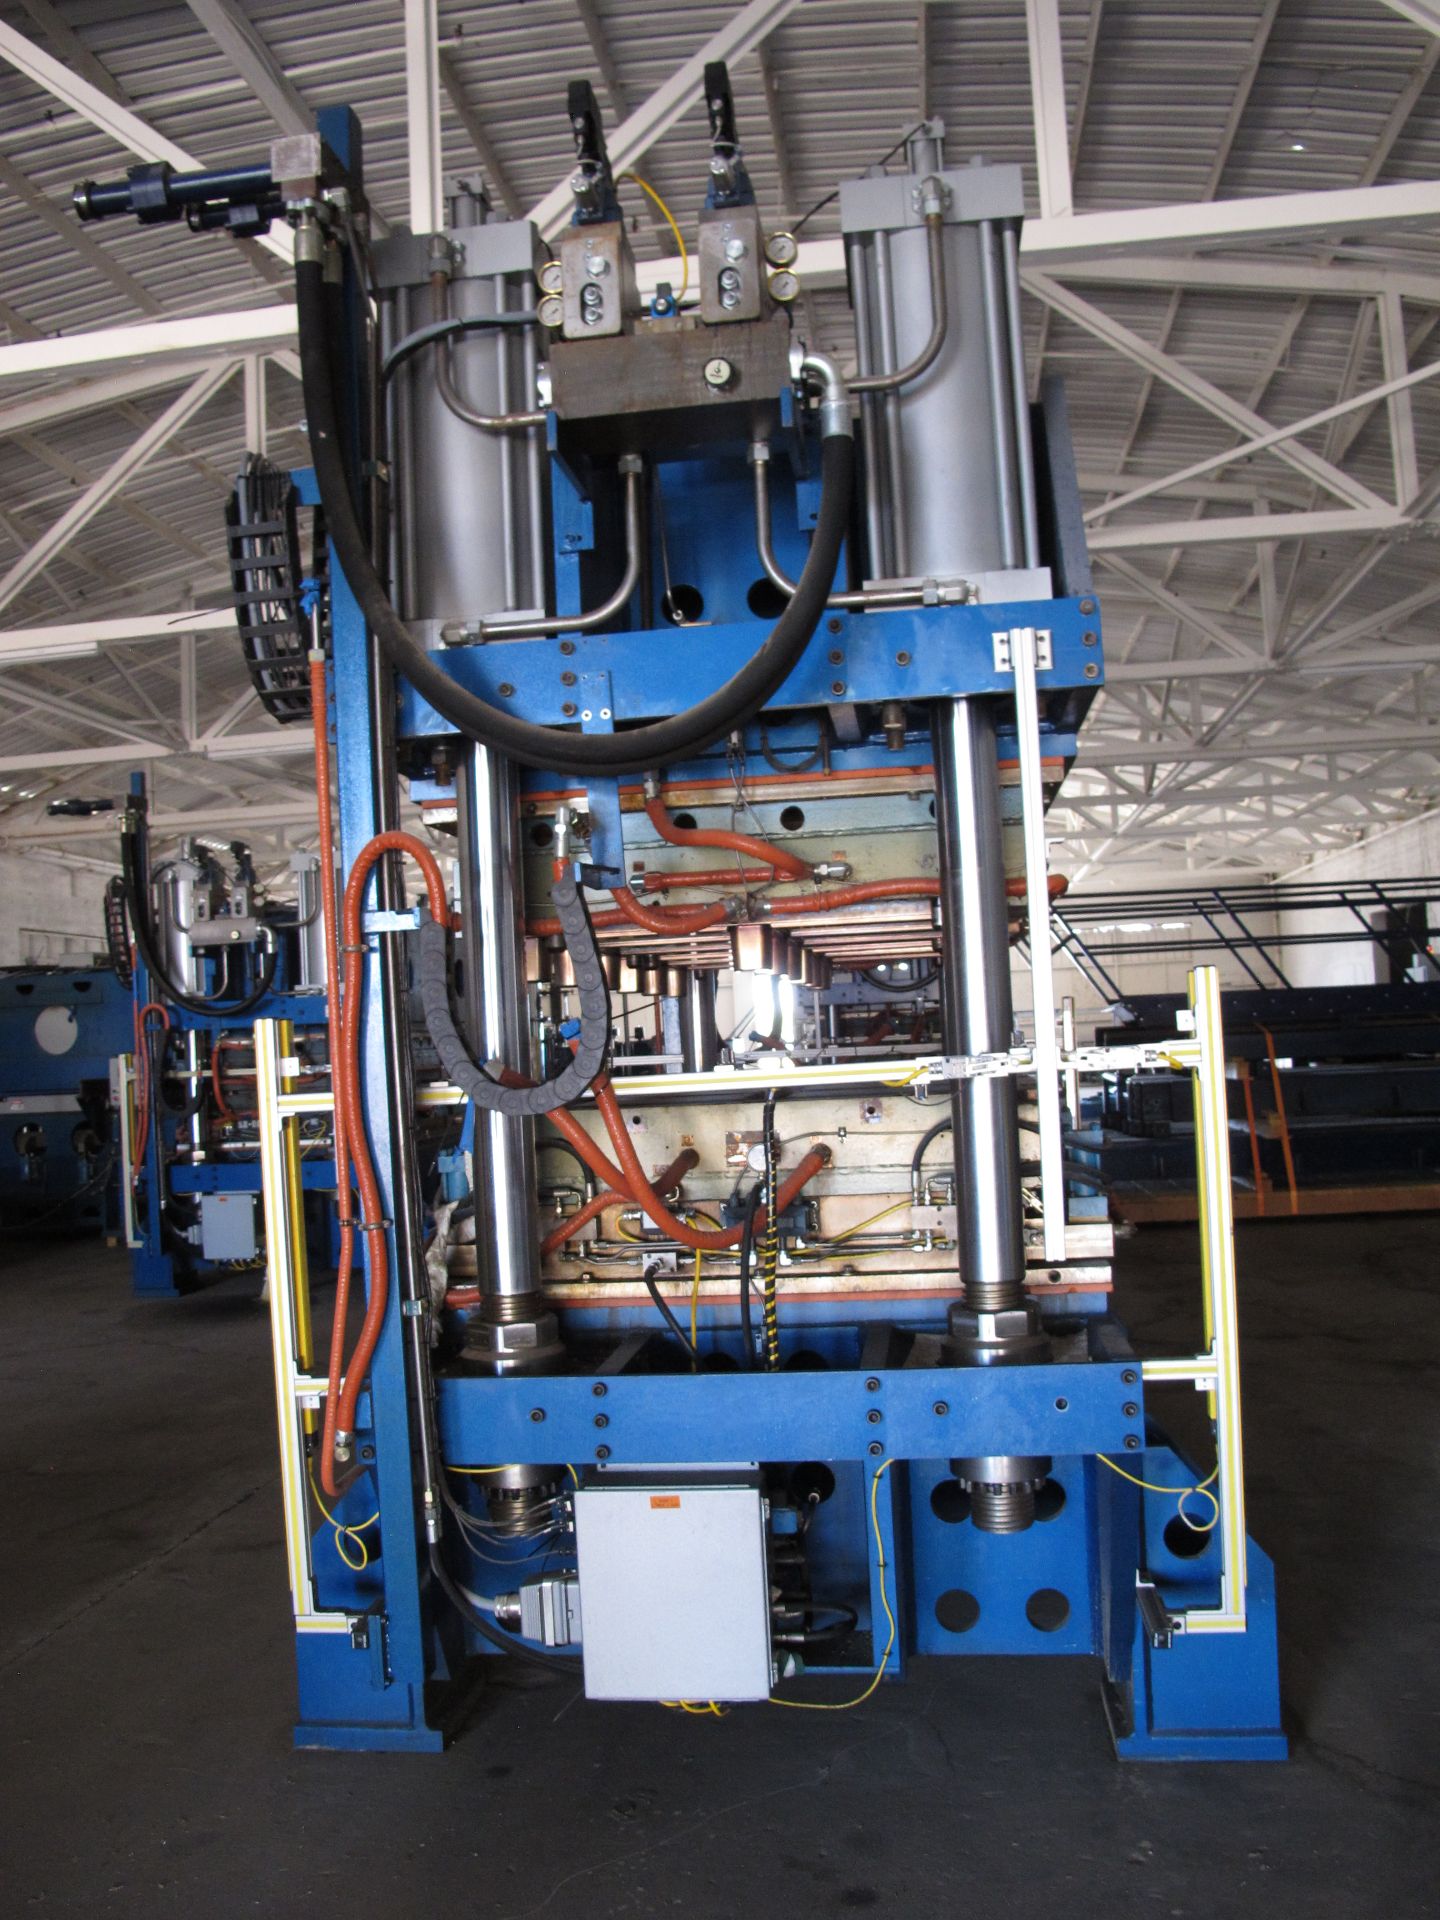 500 TON COMPRESSION MOLDING PRESS, UNKNOWN MANUFACTURER, MANUFACTURED 2010, 60" x 100" PLATTEN - Image 6 of 7